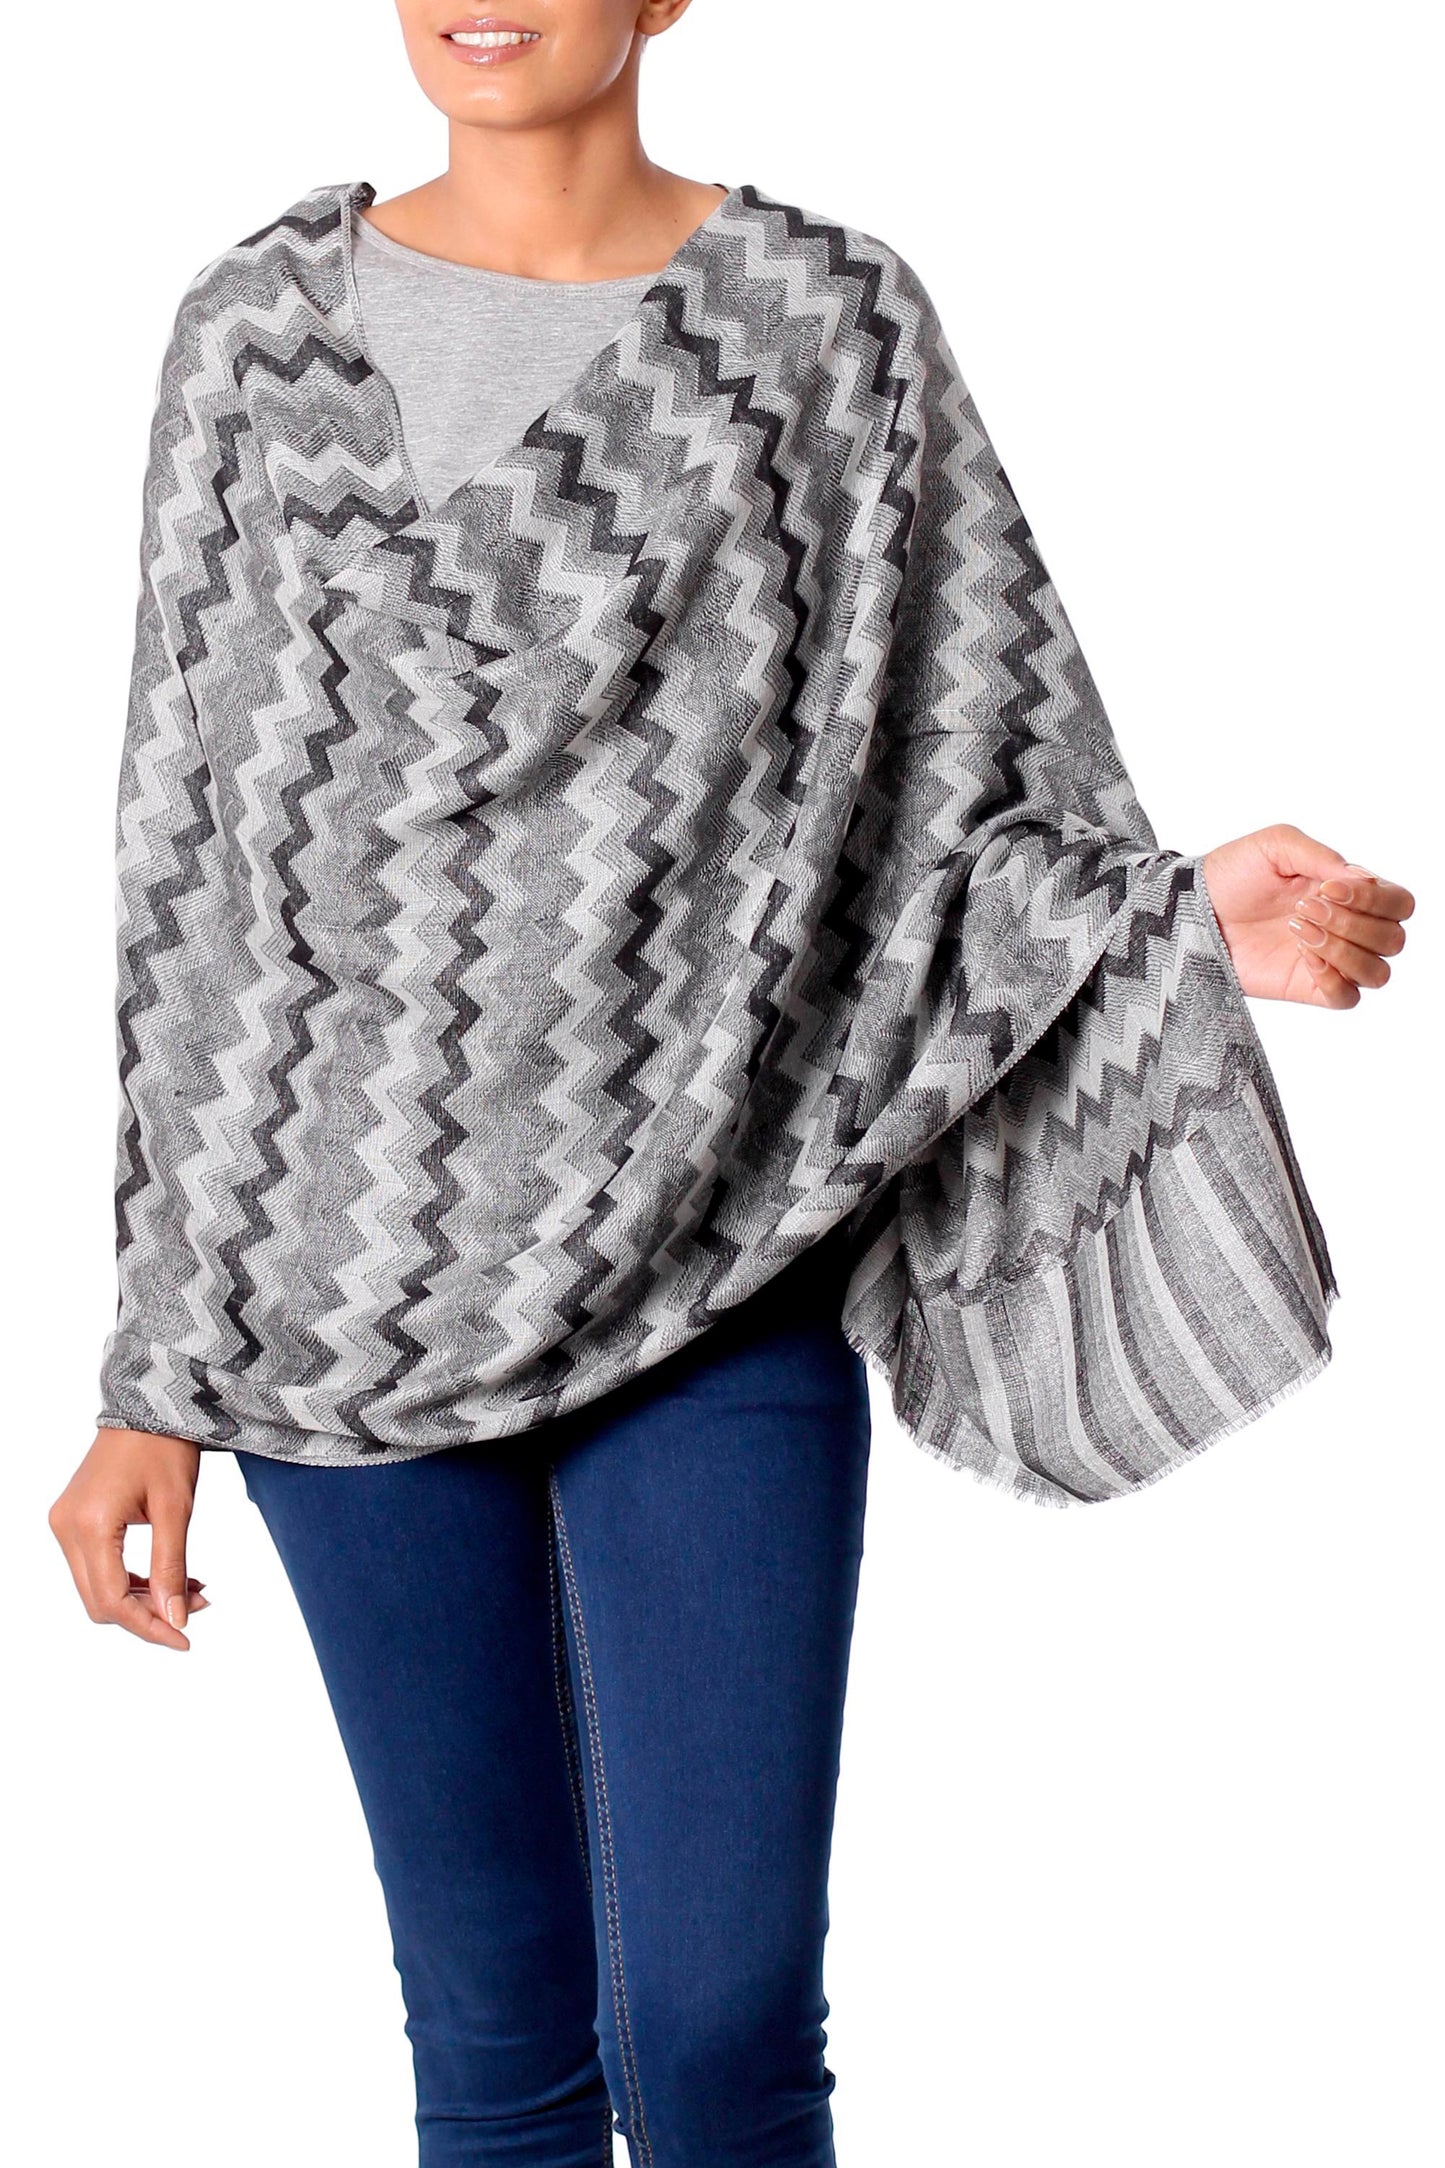 Grey Delight Hand Woven Wool Shawl from India in Grey, Black, and White